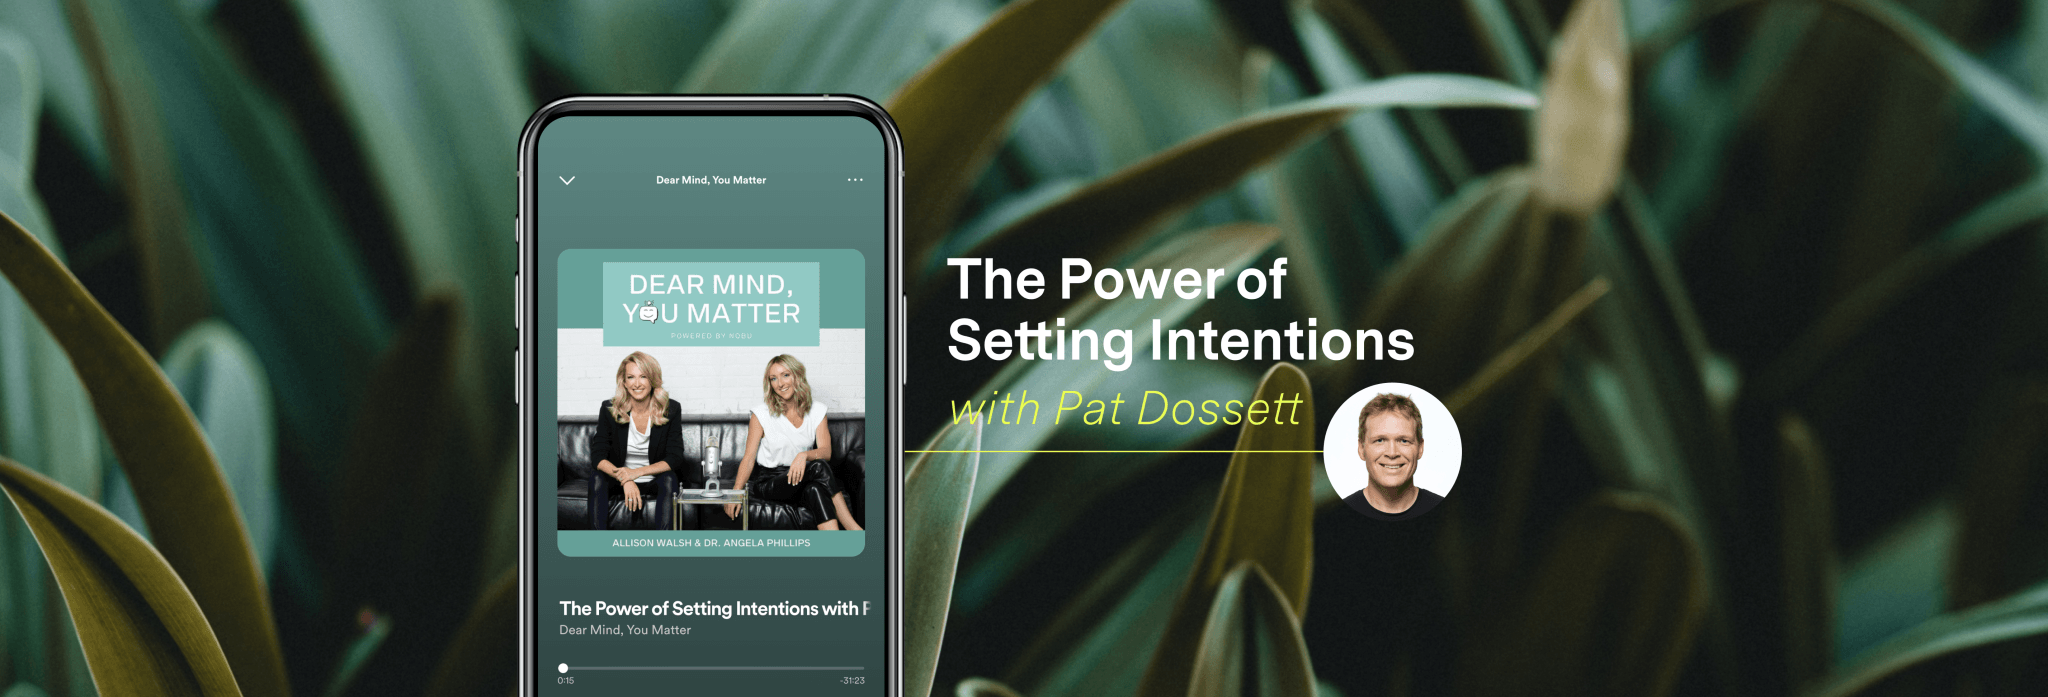 The Power of Setting Intentions | Madefor